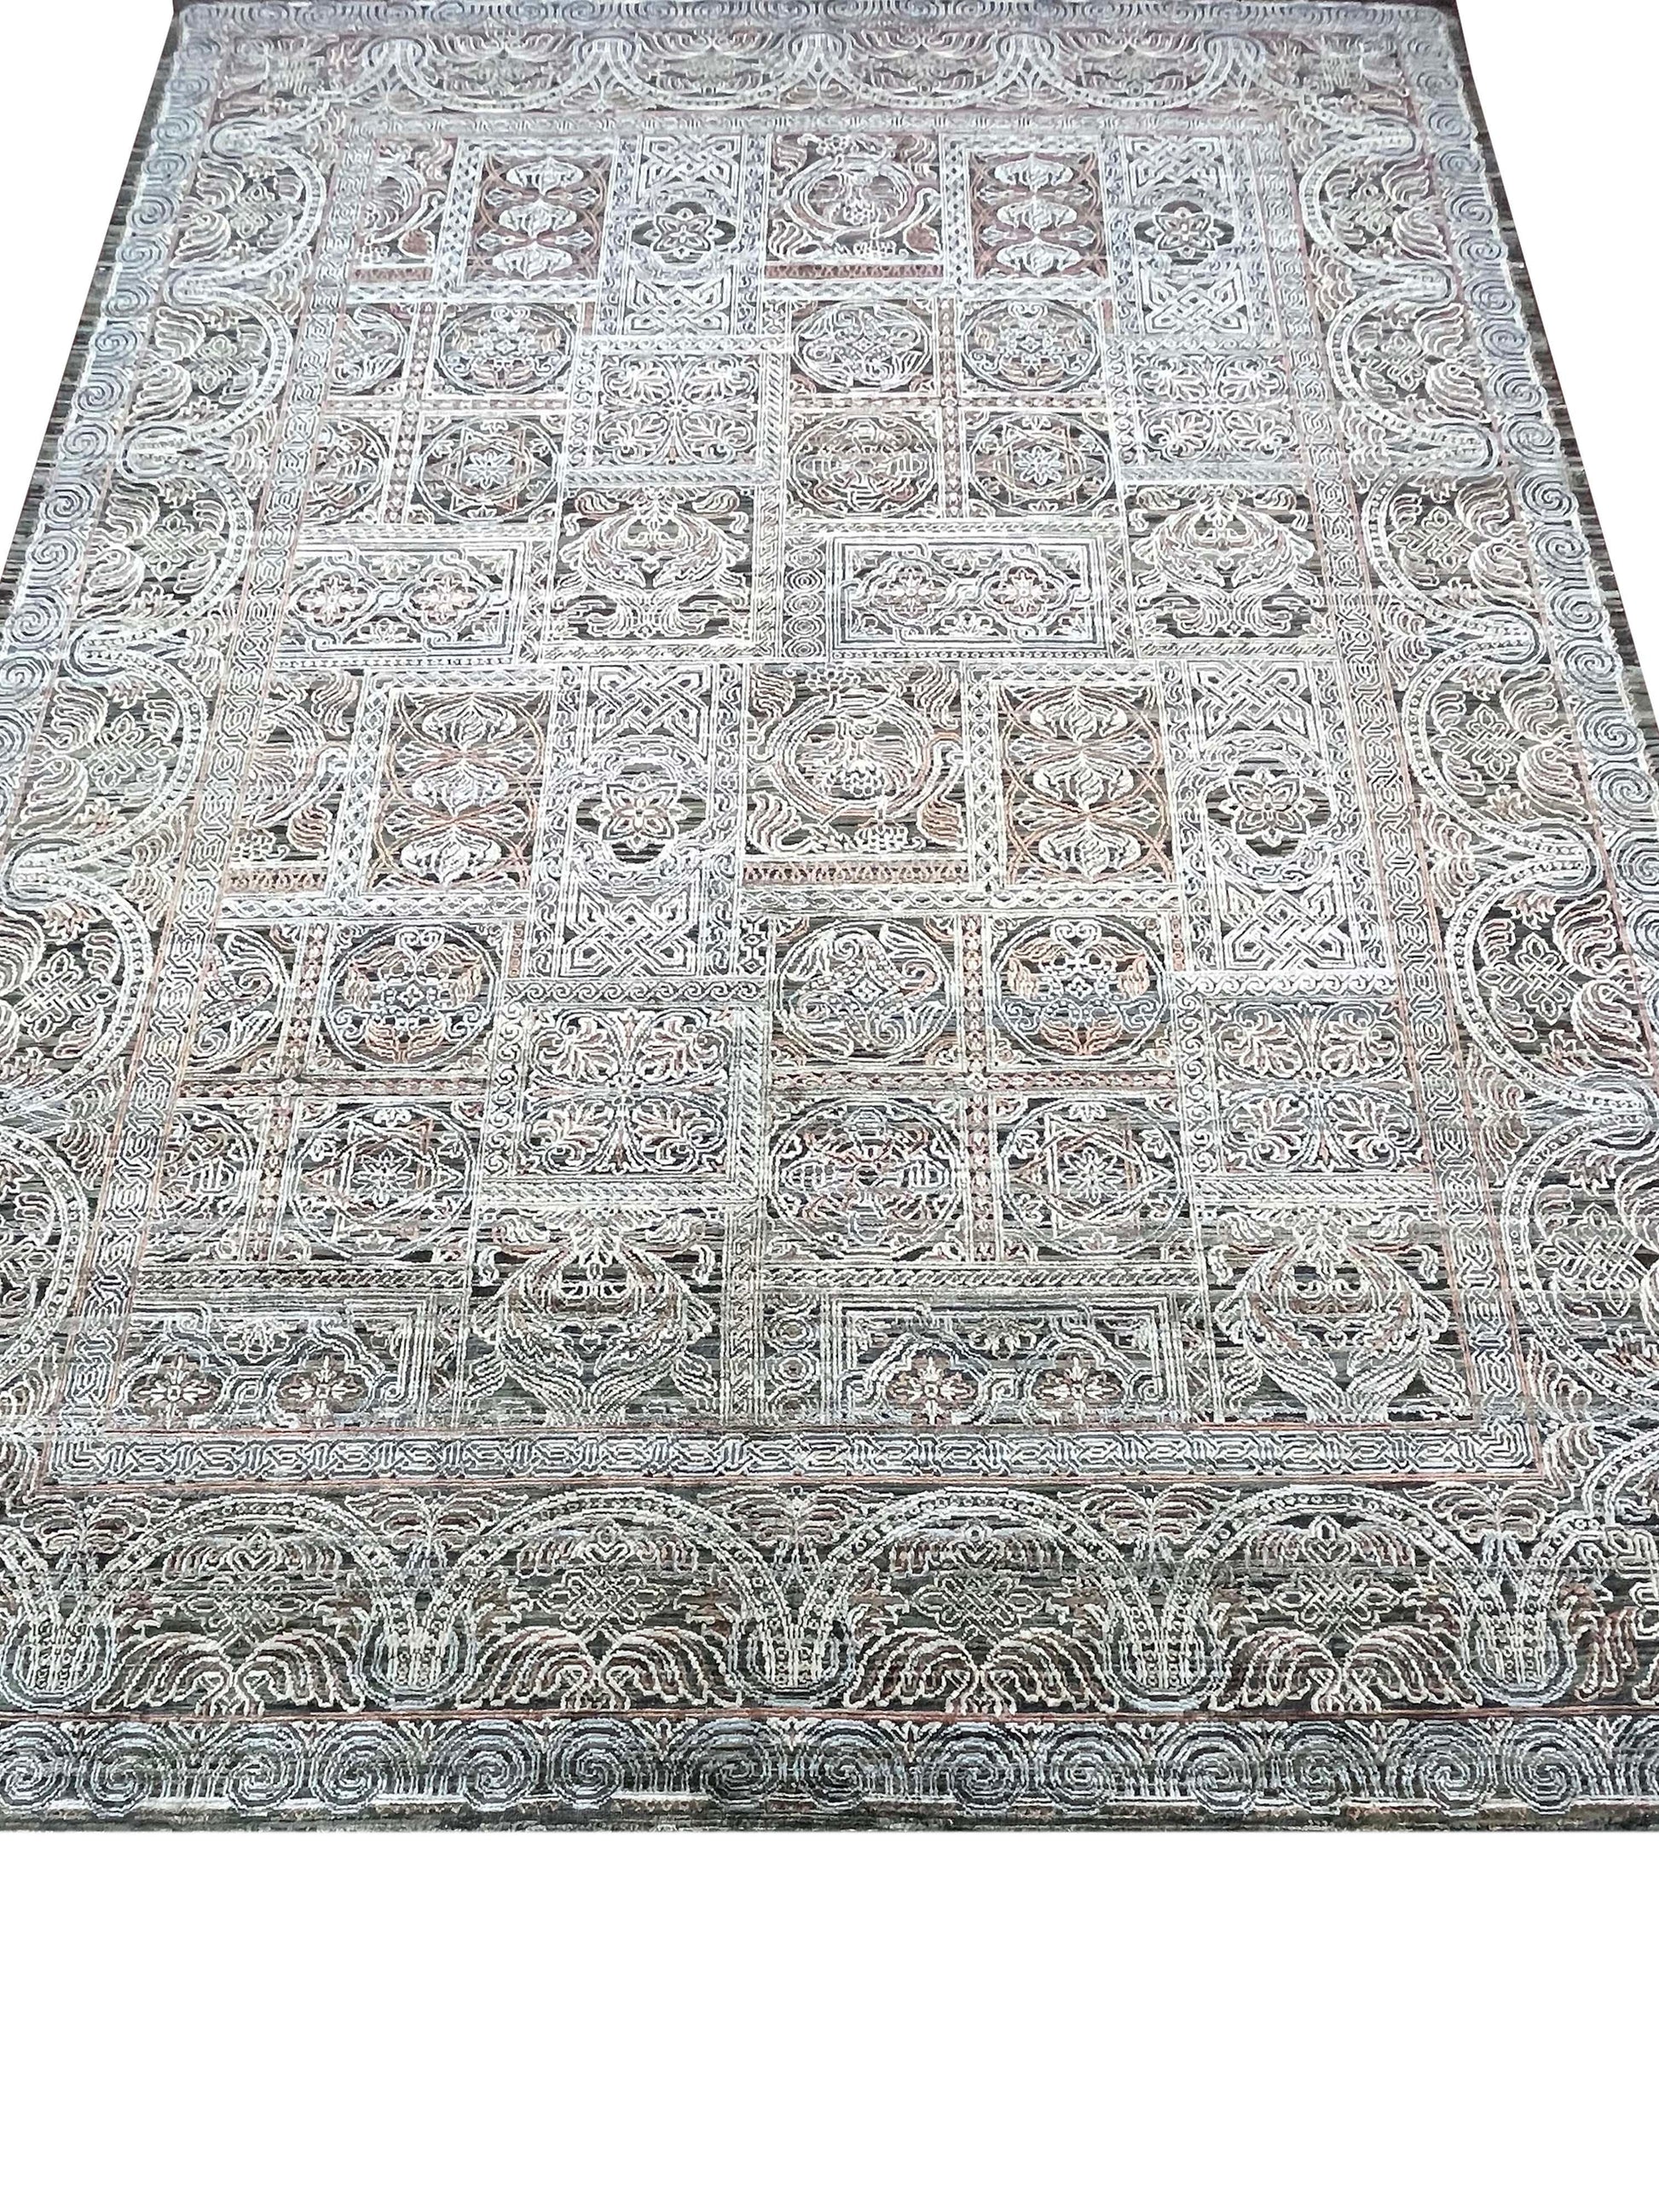 Get trendy with Brown, Ivory Pure Silk Transitional Handknotted Area Rug 8.10x12.1ft 268x368Cms - Contemporary Rugs available at Jaipur Oriental Rugs. Grab yours for $7685.00 today!